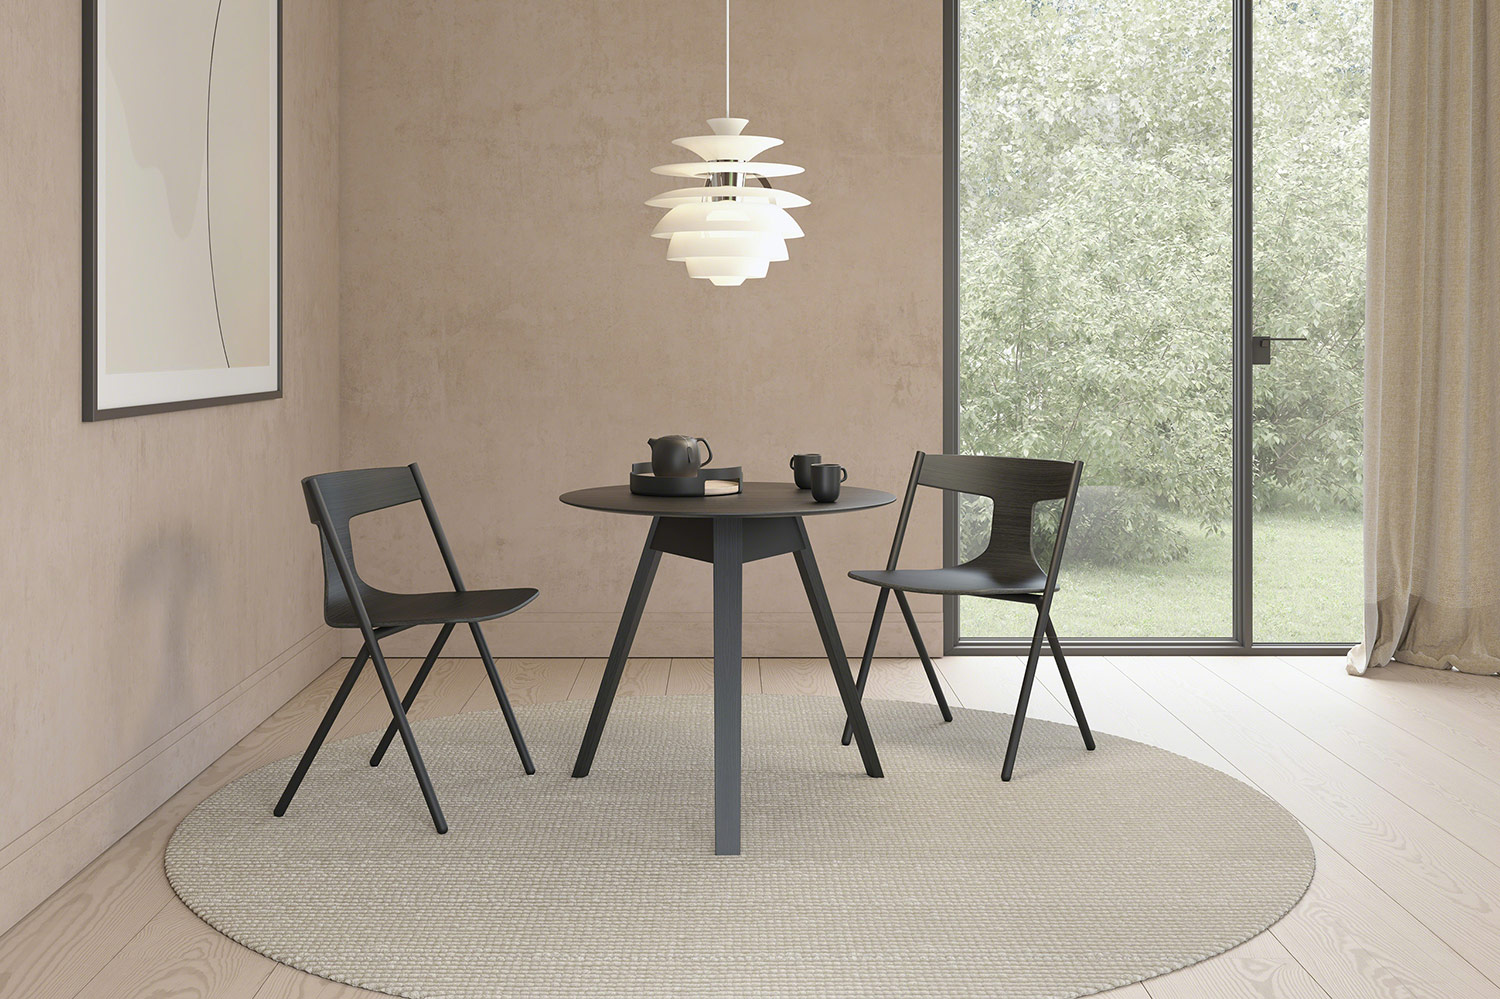 black Trivio table with two chairs on a carpet under a light